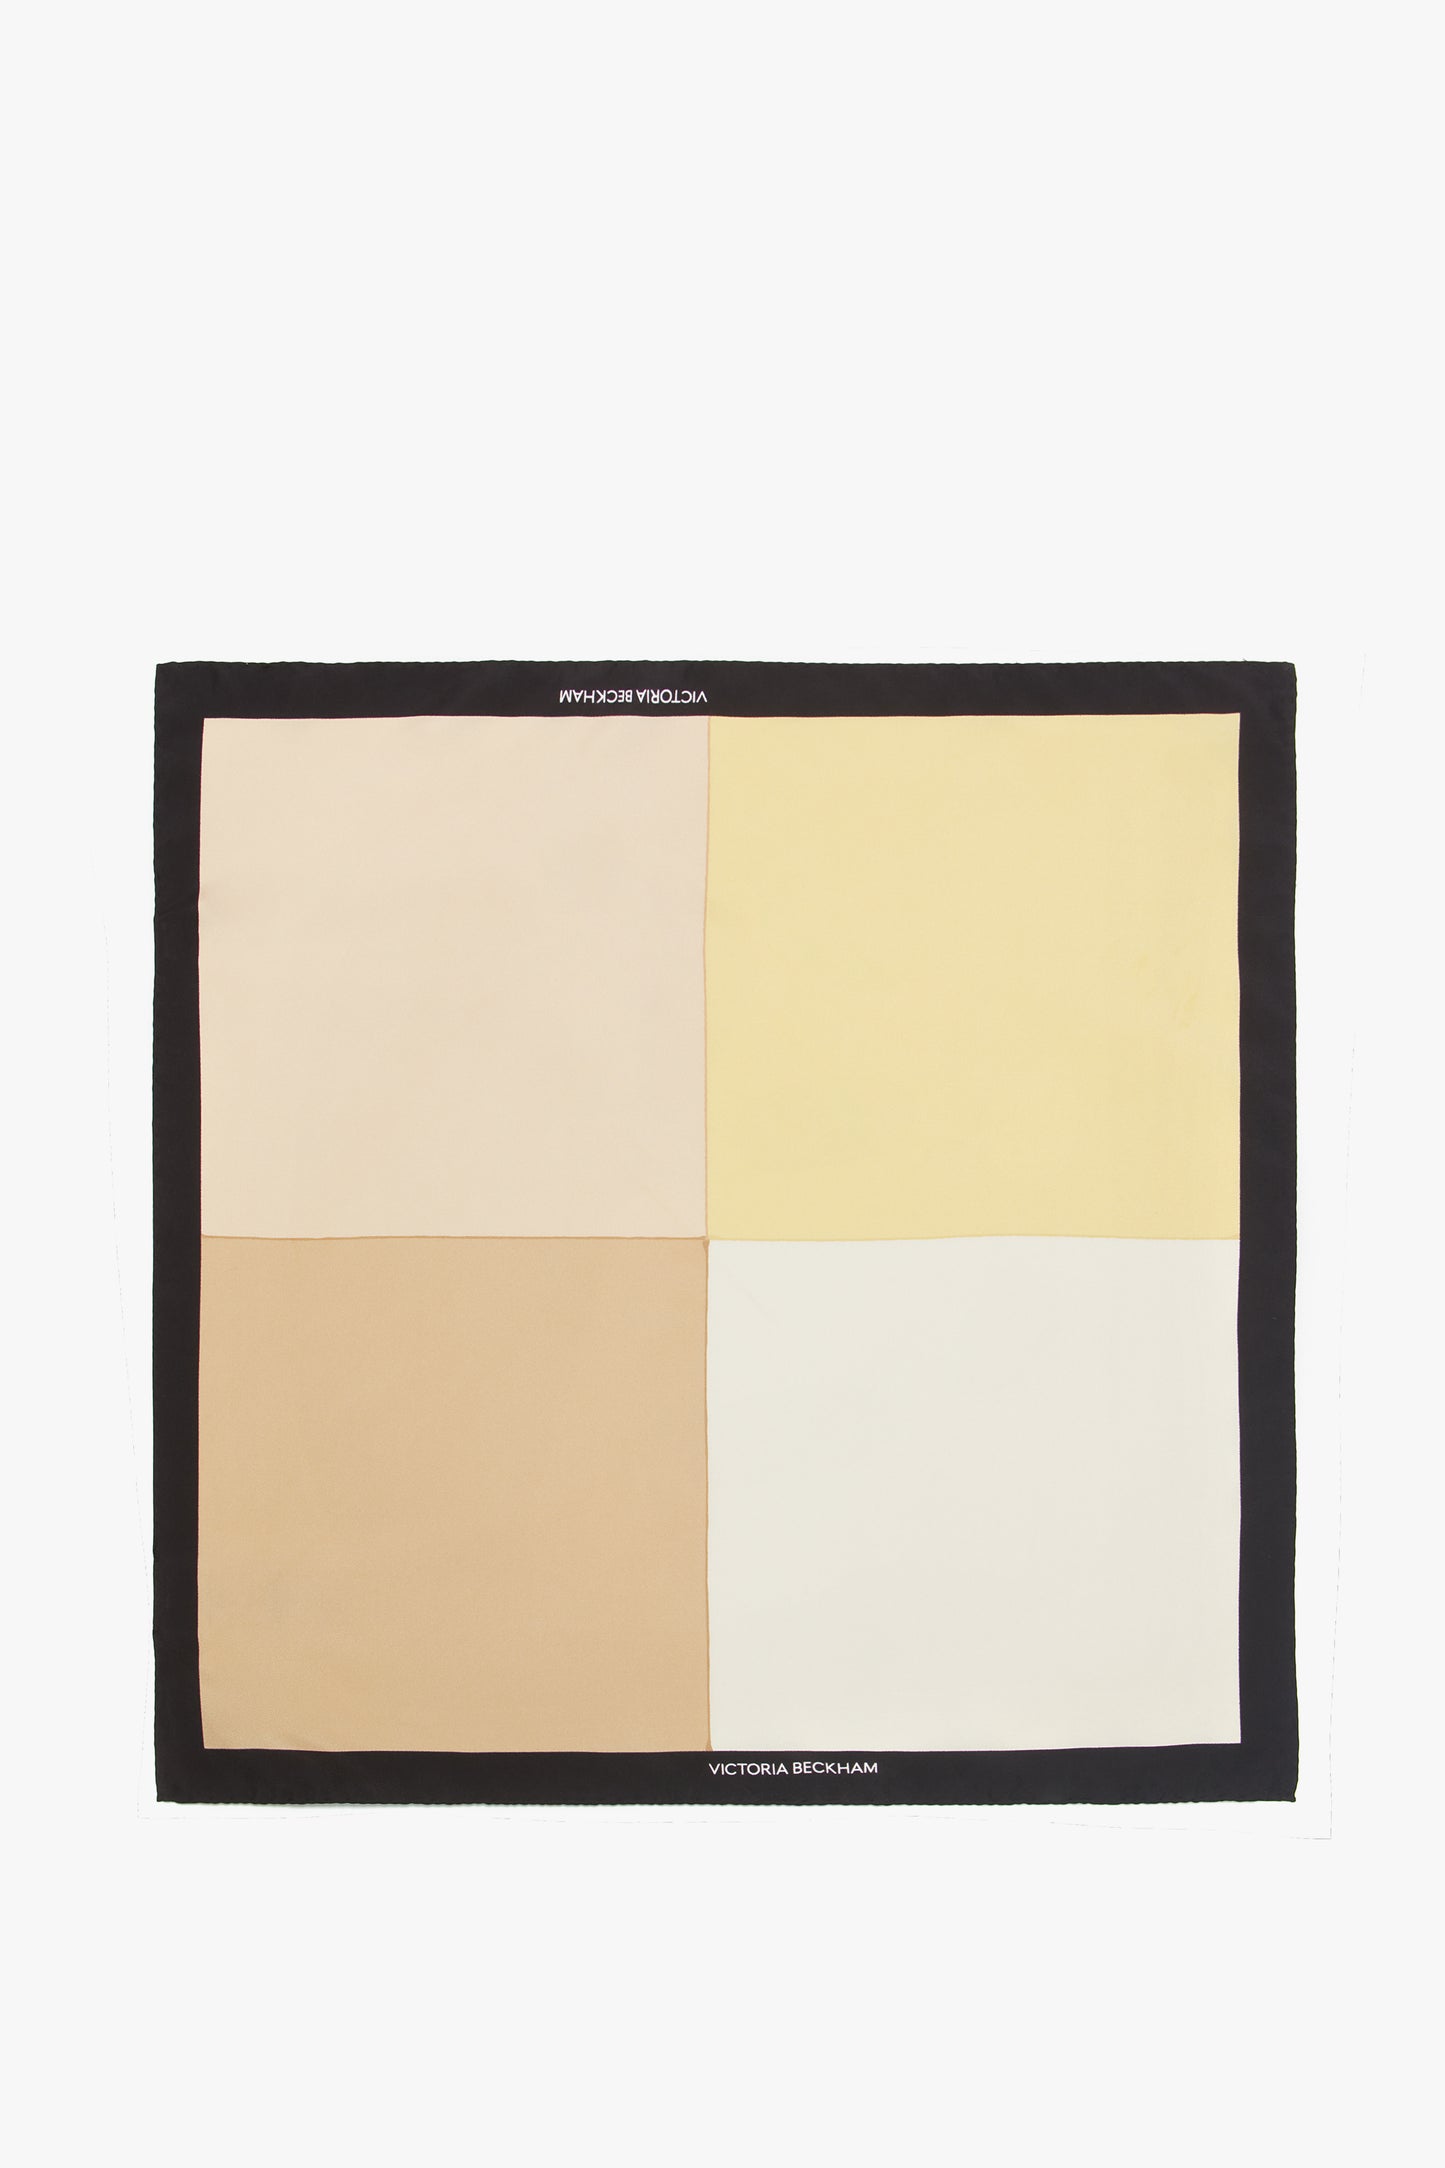 A Victoria Beckham luxurious Colour Block Foulard In Macadamia with a geometric pattern of beige, yellow, and white blocks on a black border.